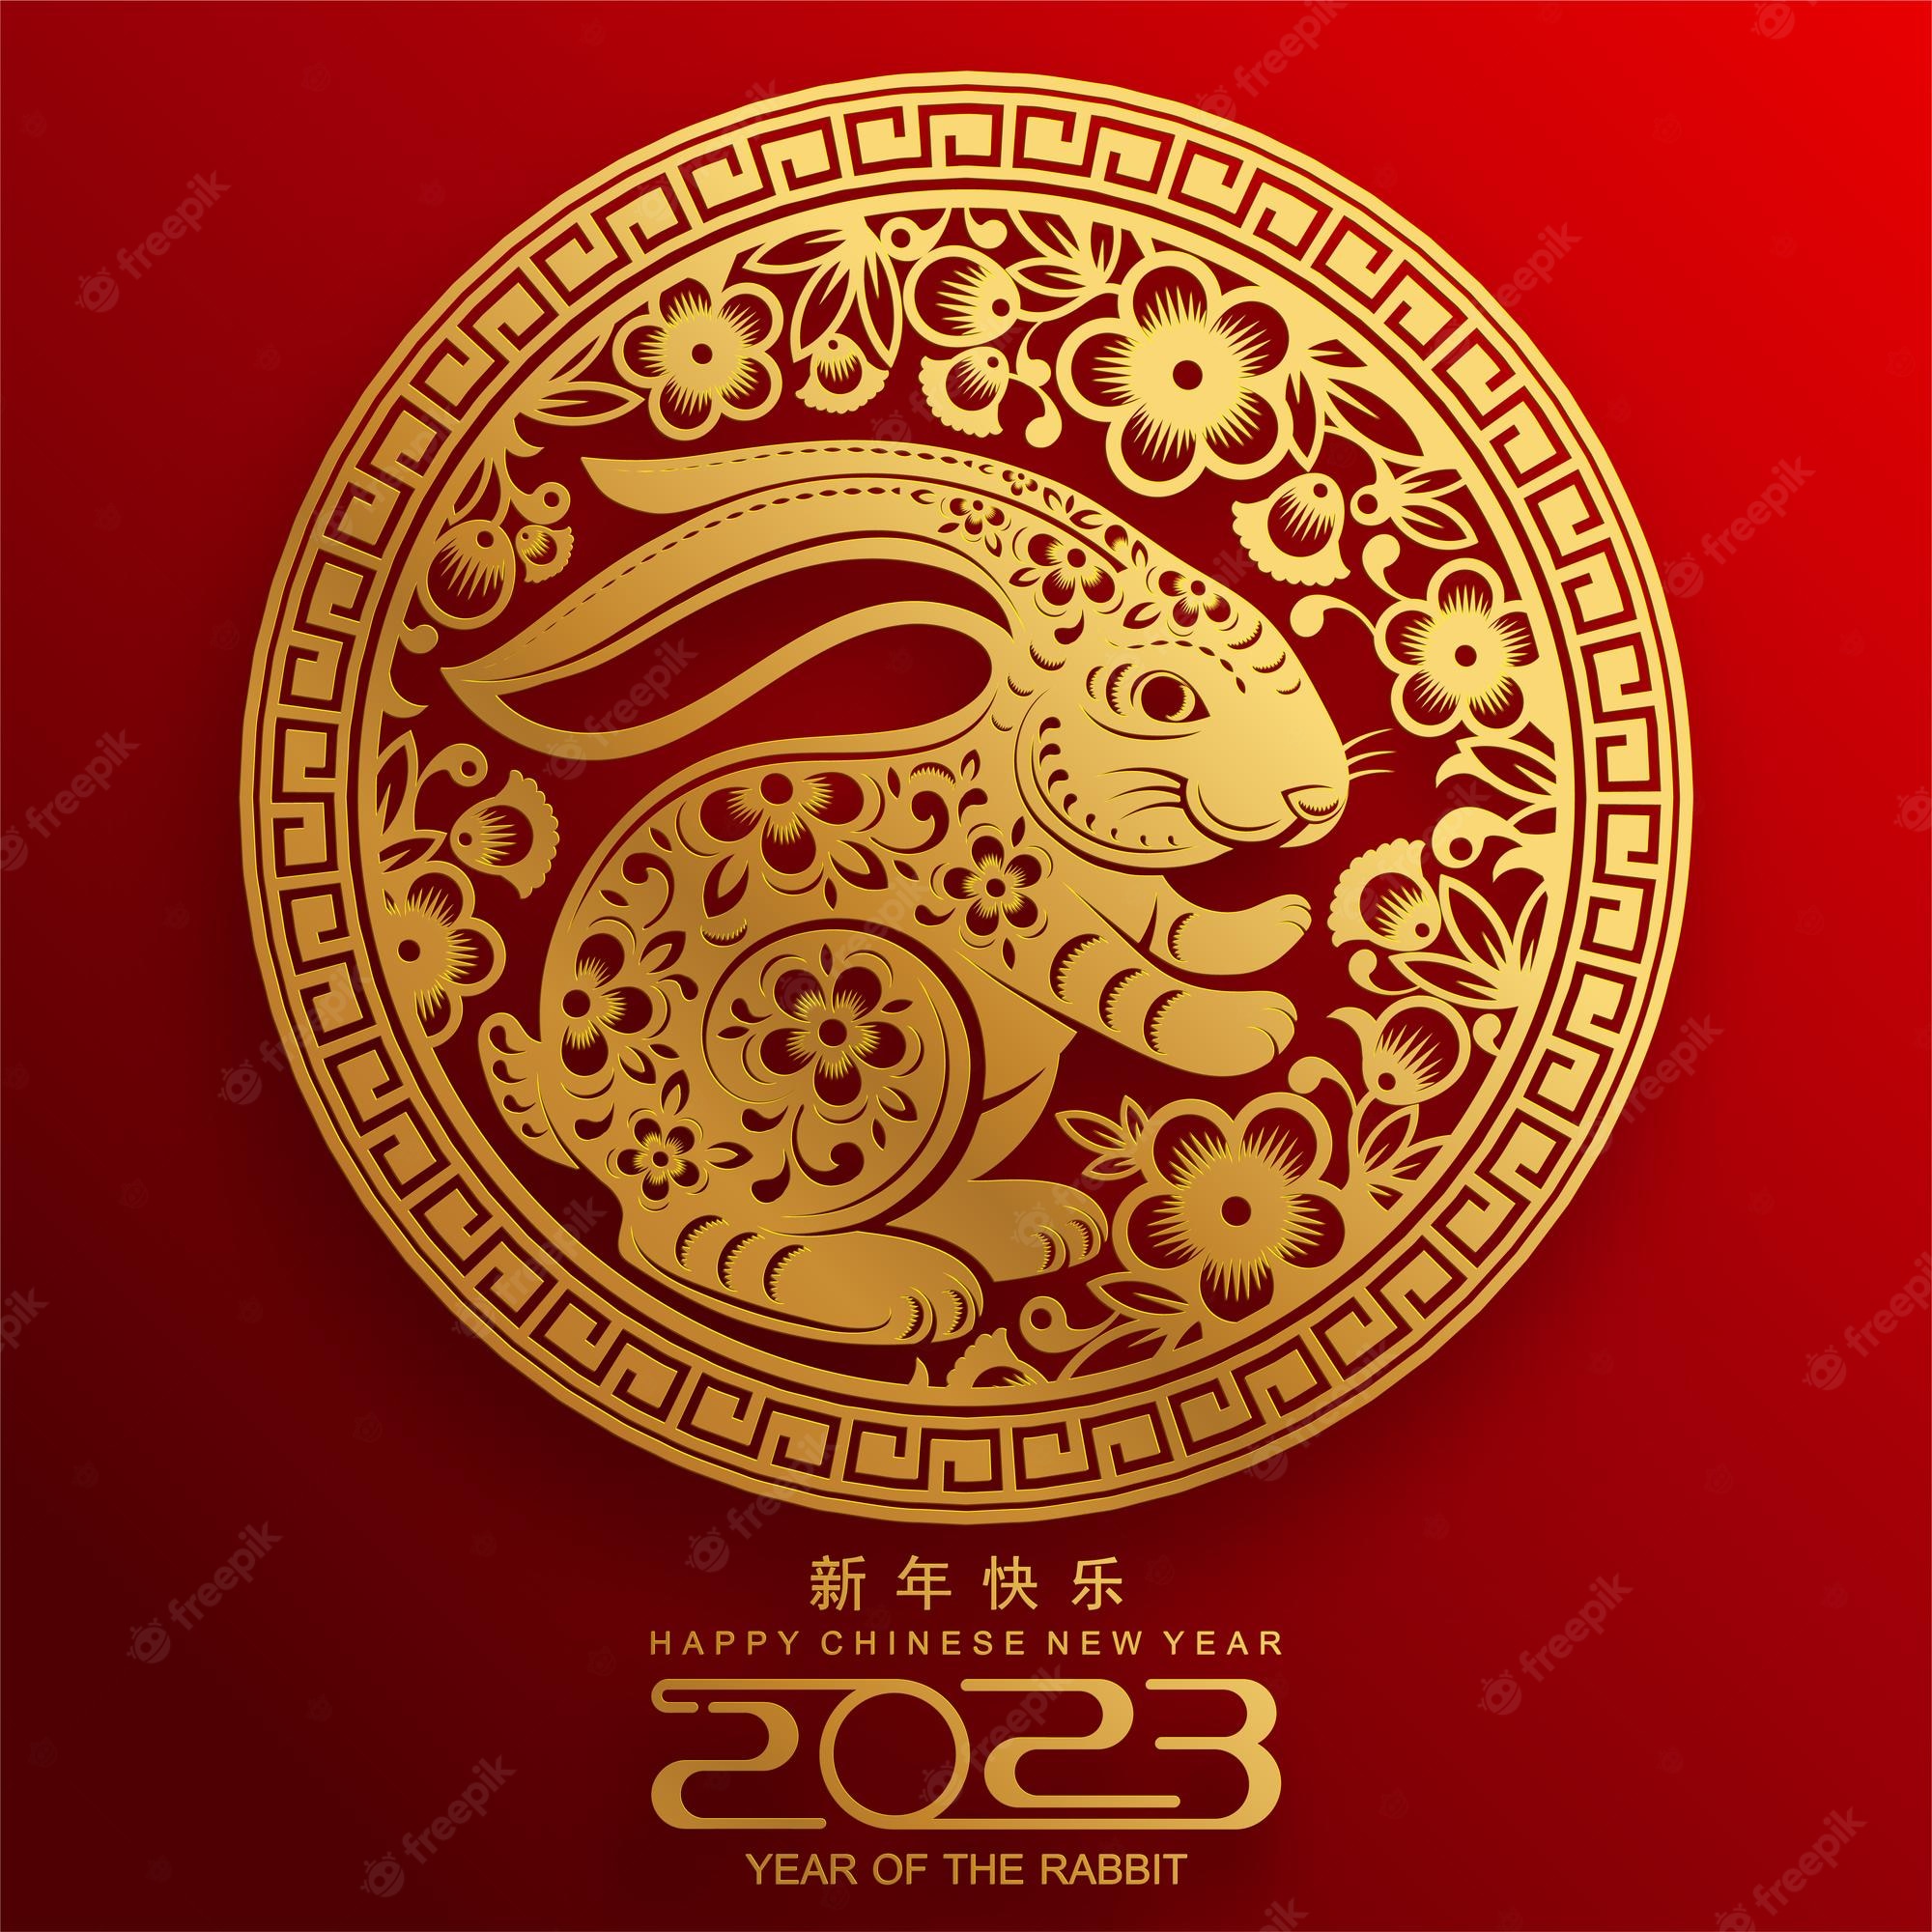 Premium Vector. Happy chinese new year 2023 year of the rabbit zodiac sign, gong xi fa cai with flower, lantern, asian elements gold paper cut style on color background. translation, happy new